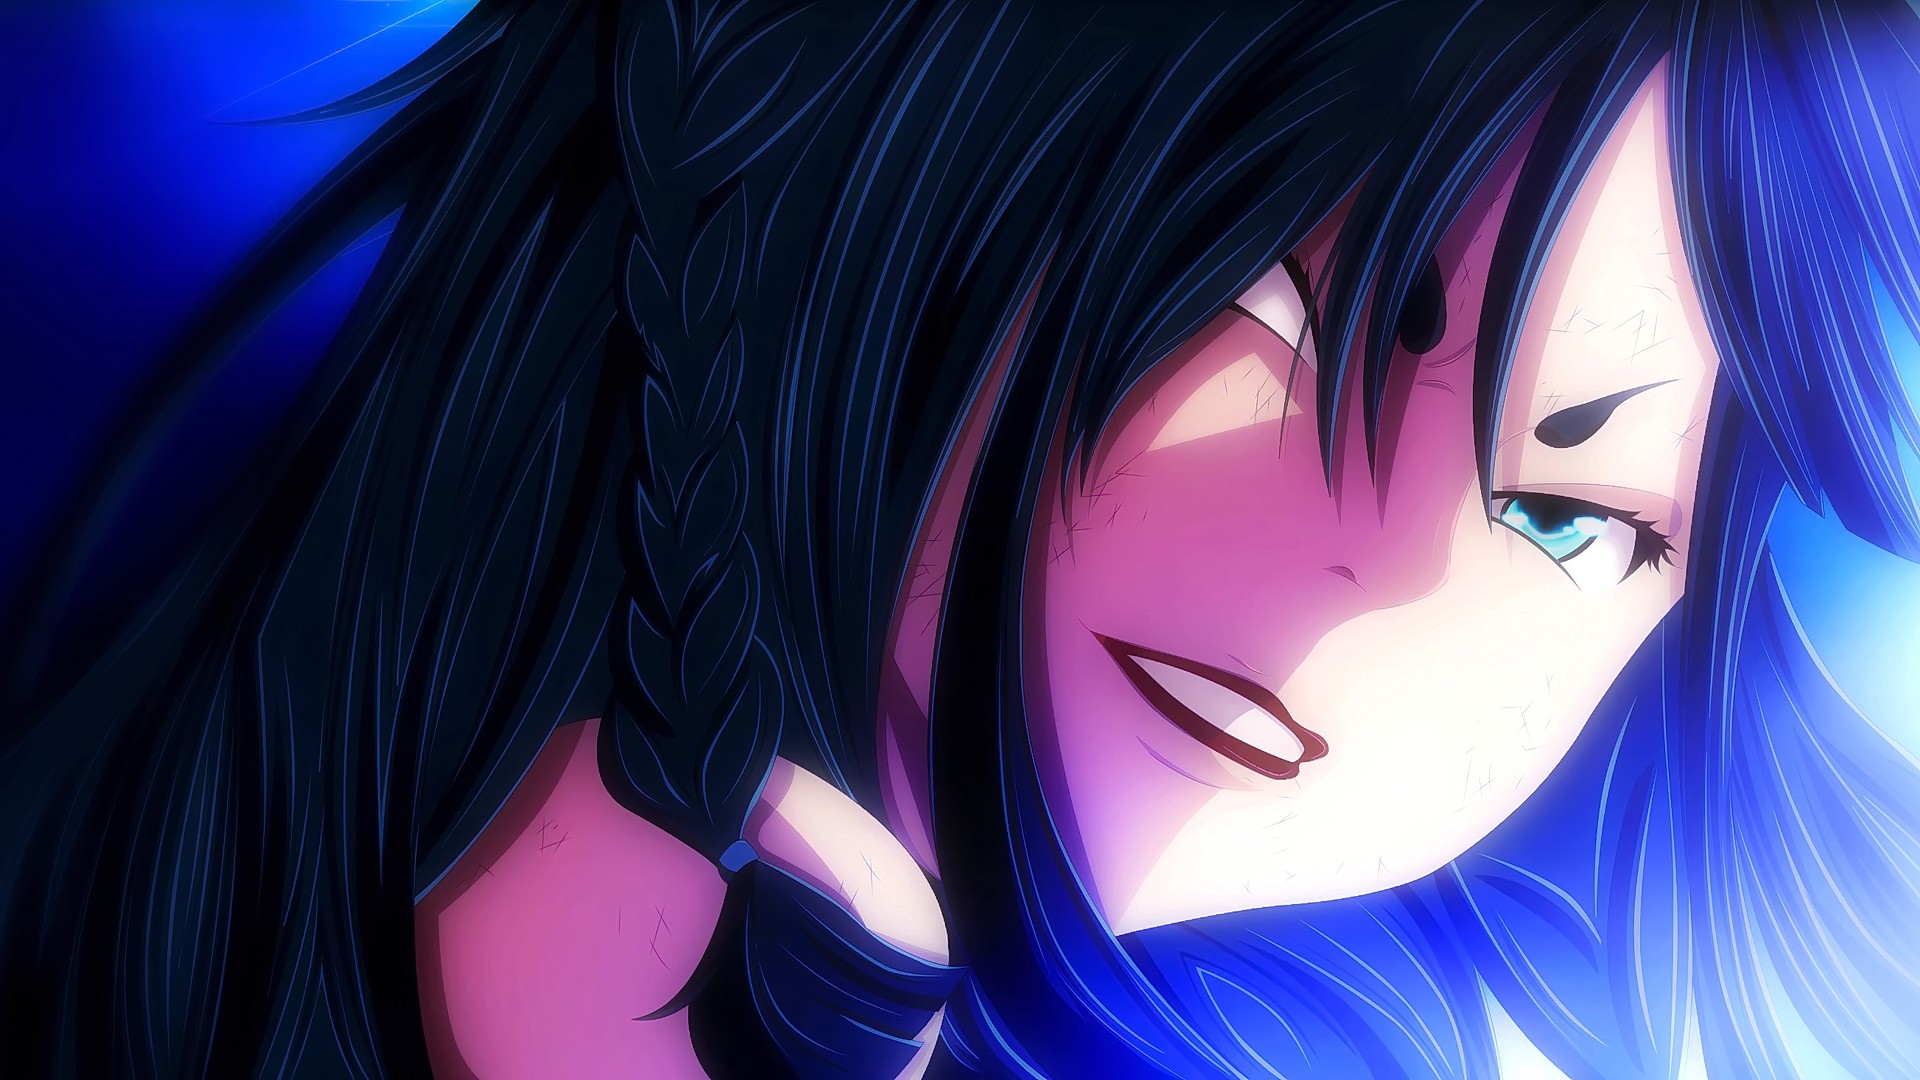 Anime 1920x1080 anime anime girls Fairy Tail long hair angry face closeup red lipstick aqua eyes blue hair looking at viewer